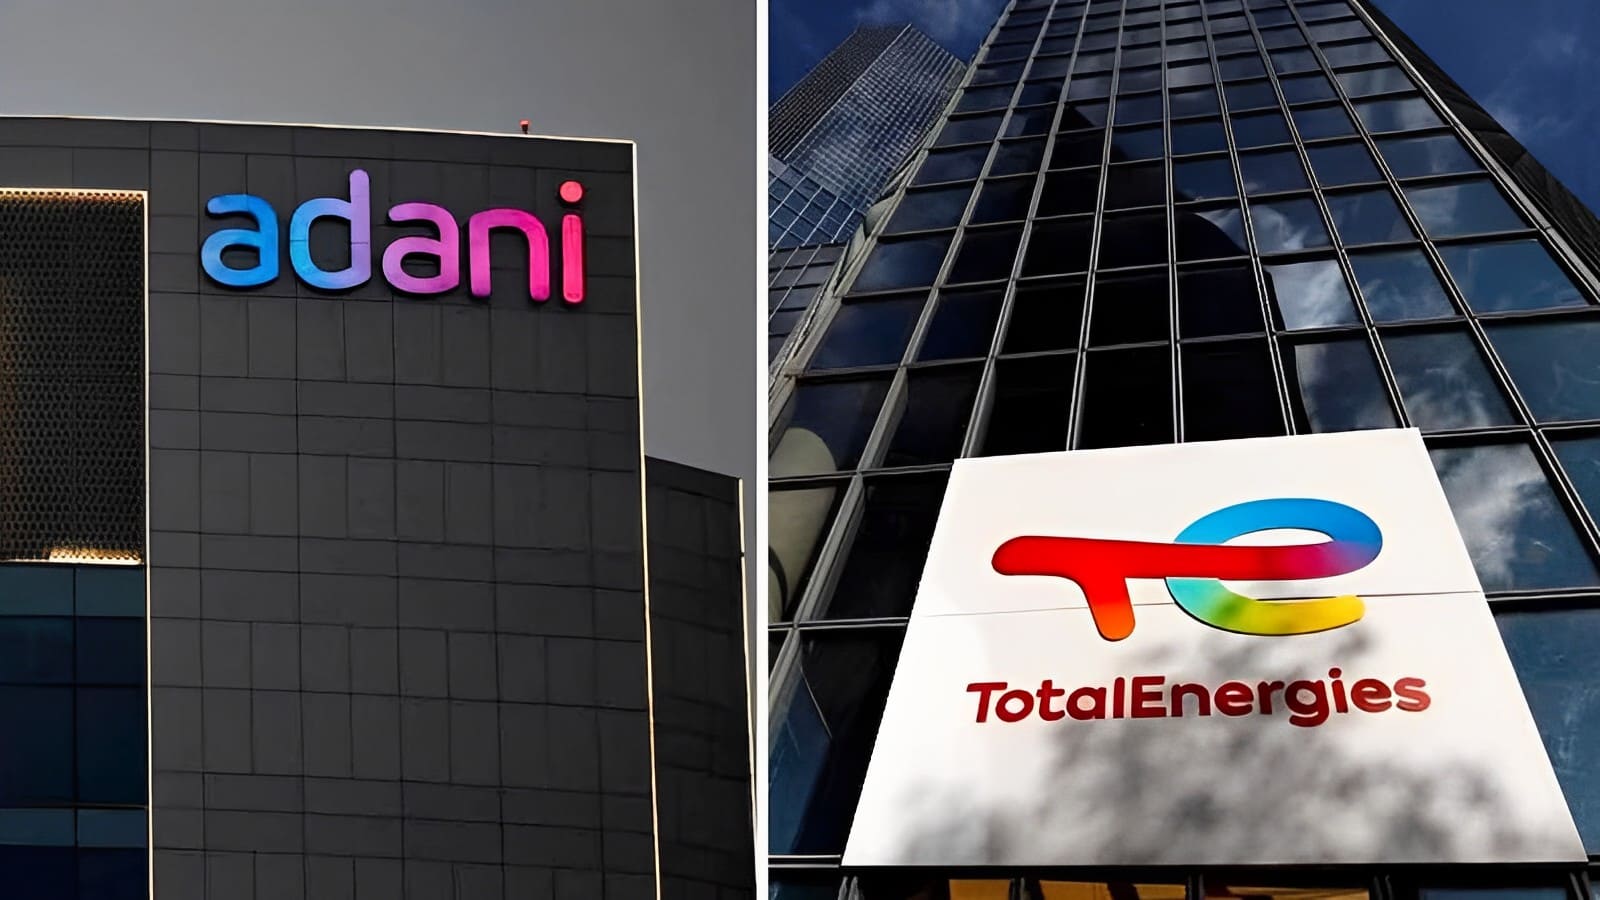 TotalEnergies Pauses Hydrogen Partnership with Adani